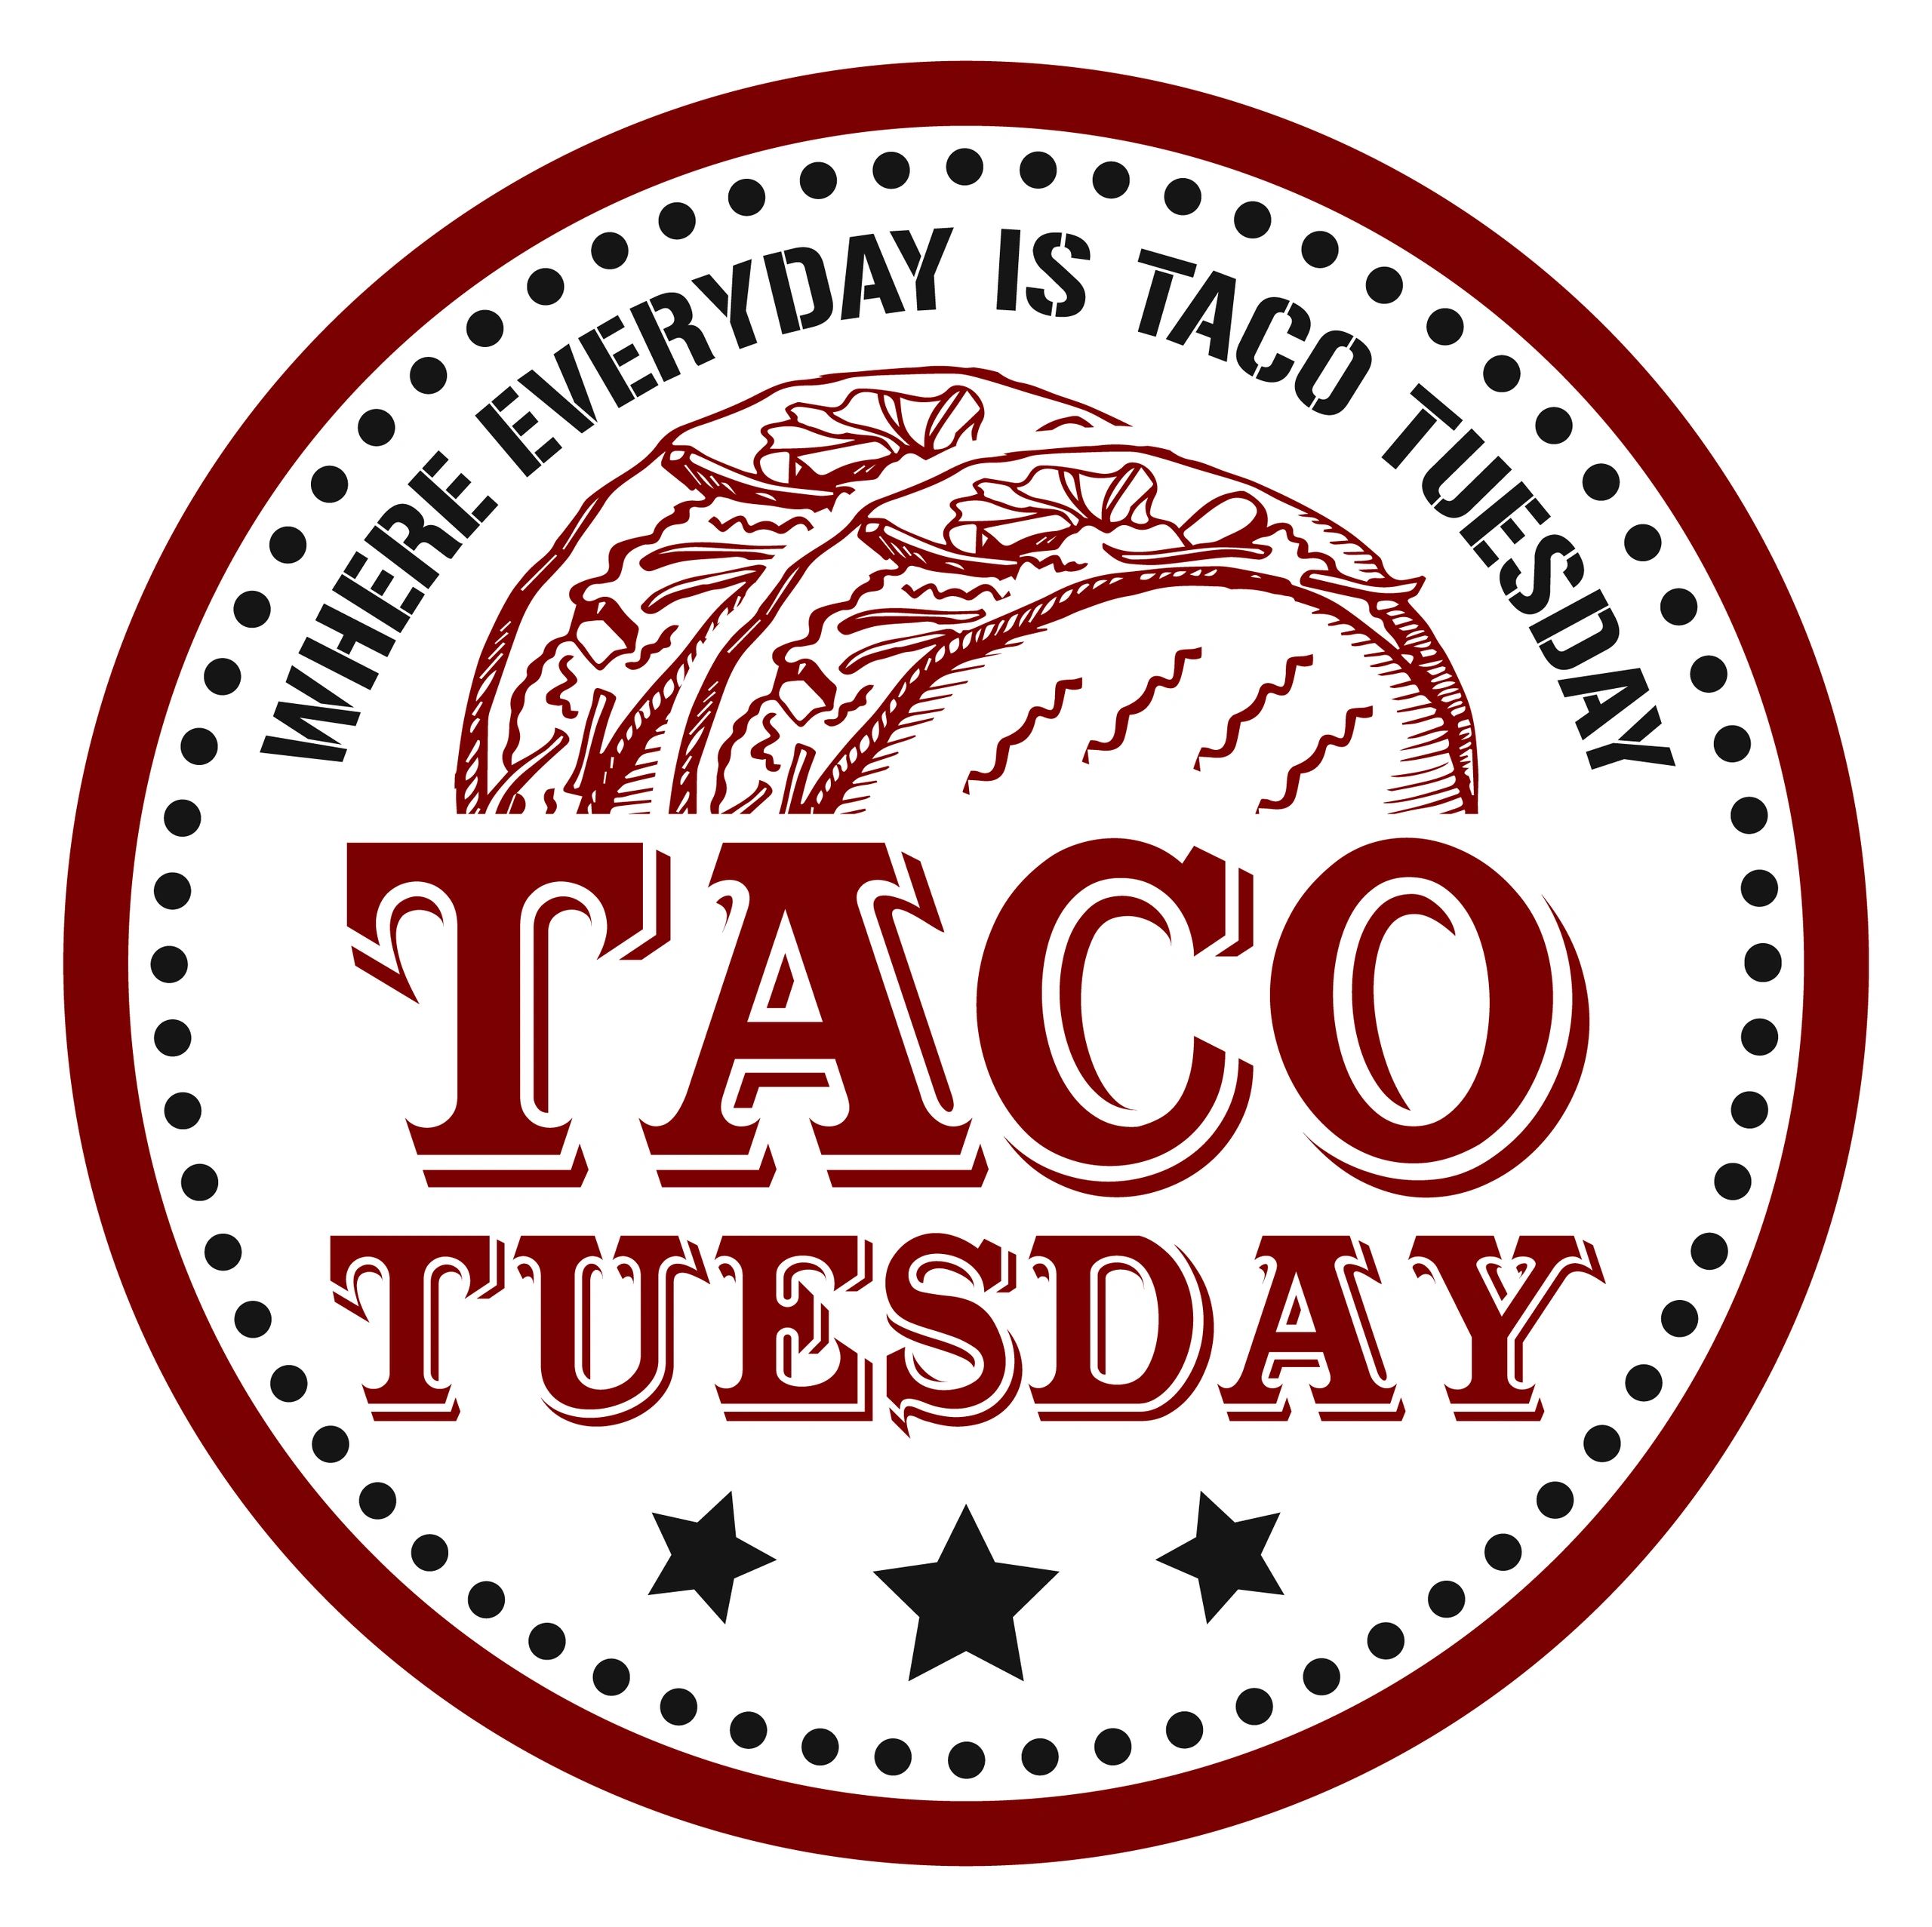 Let's Taco Tuesday!! 🌮🌮🌮 #luxdeville #taco #tacotuesday